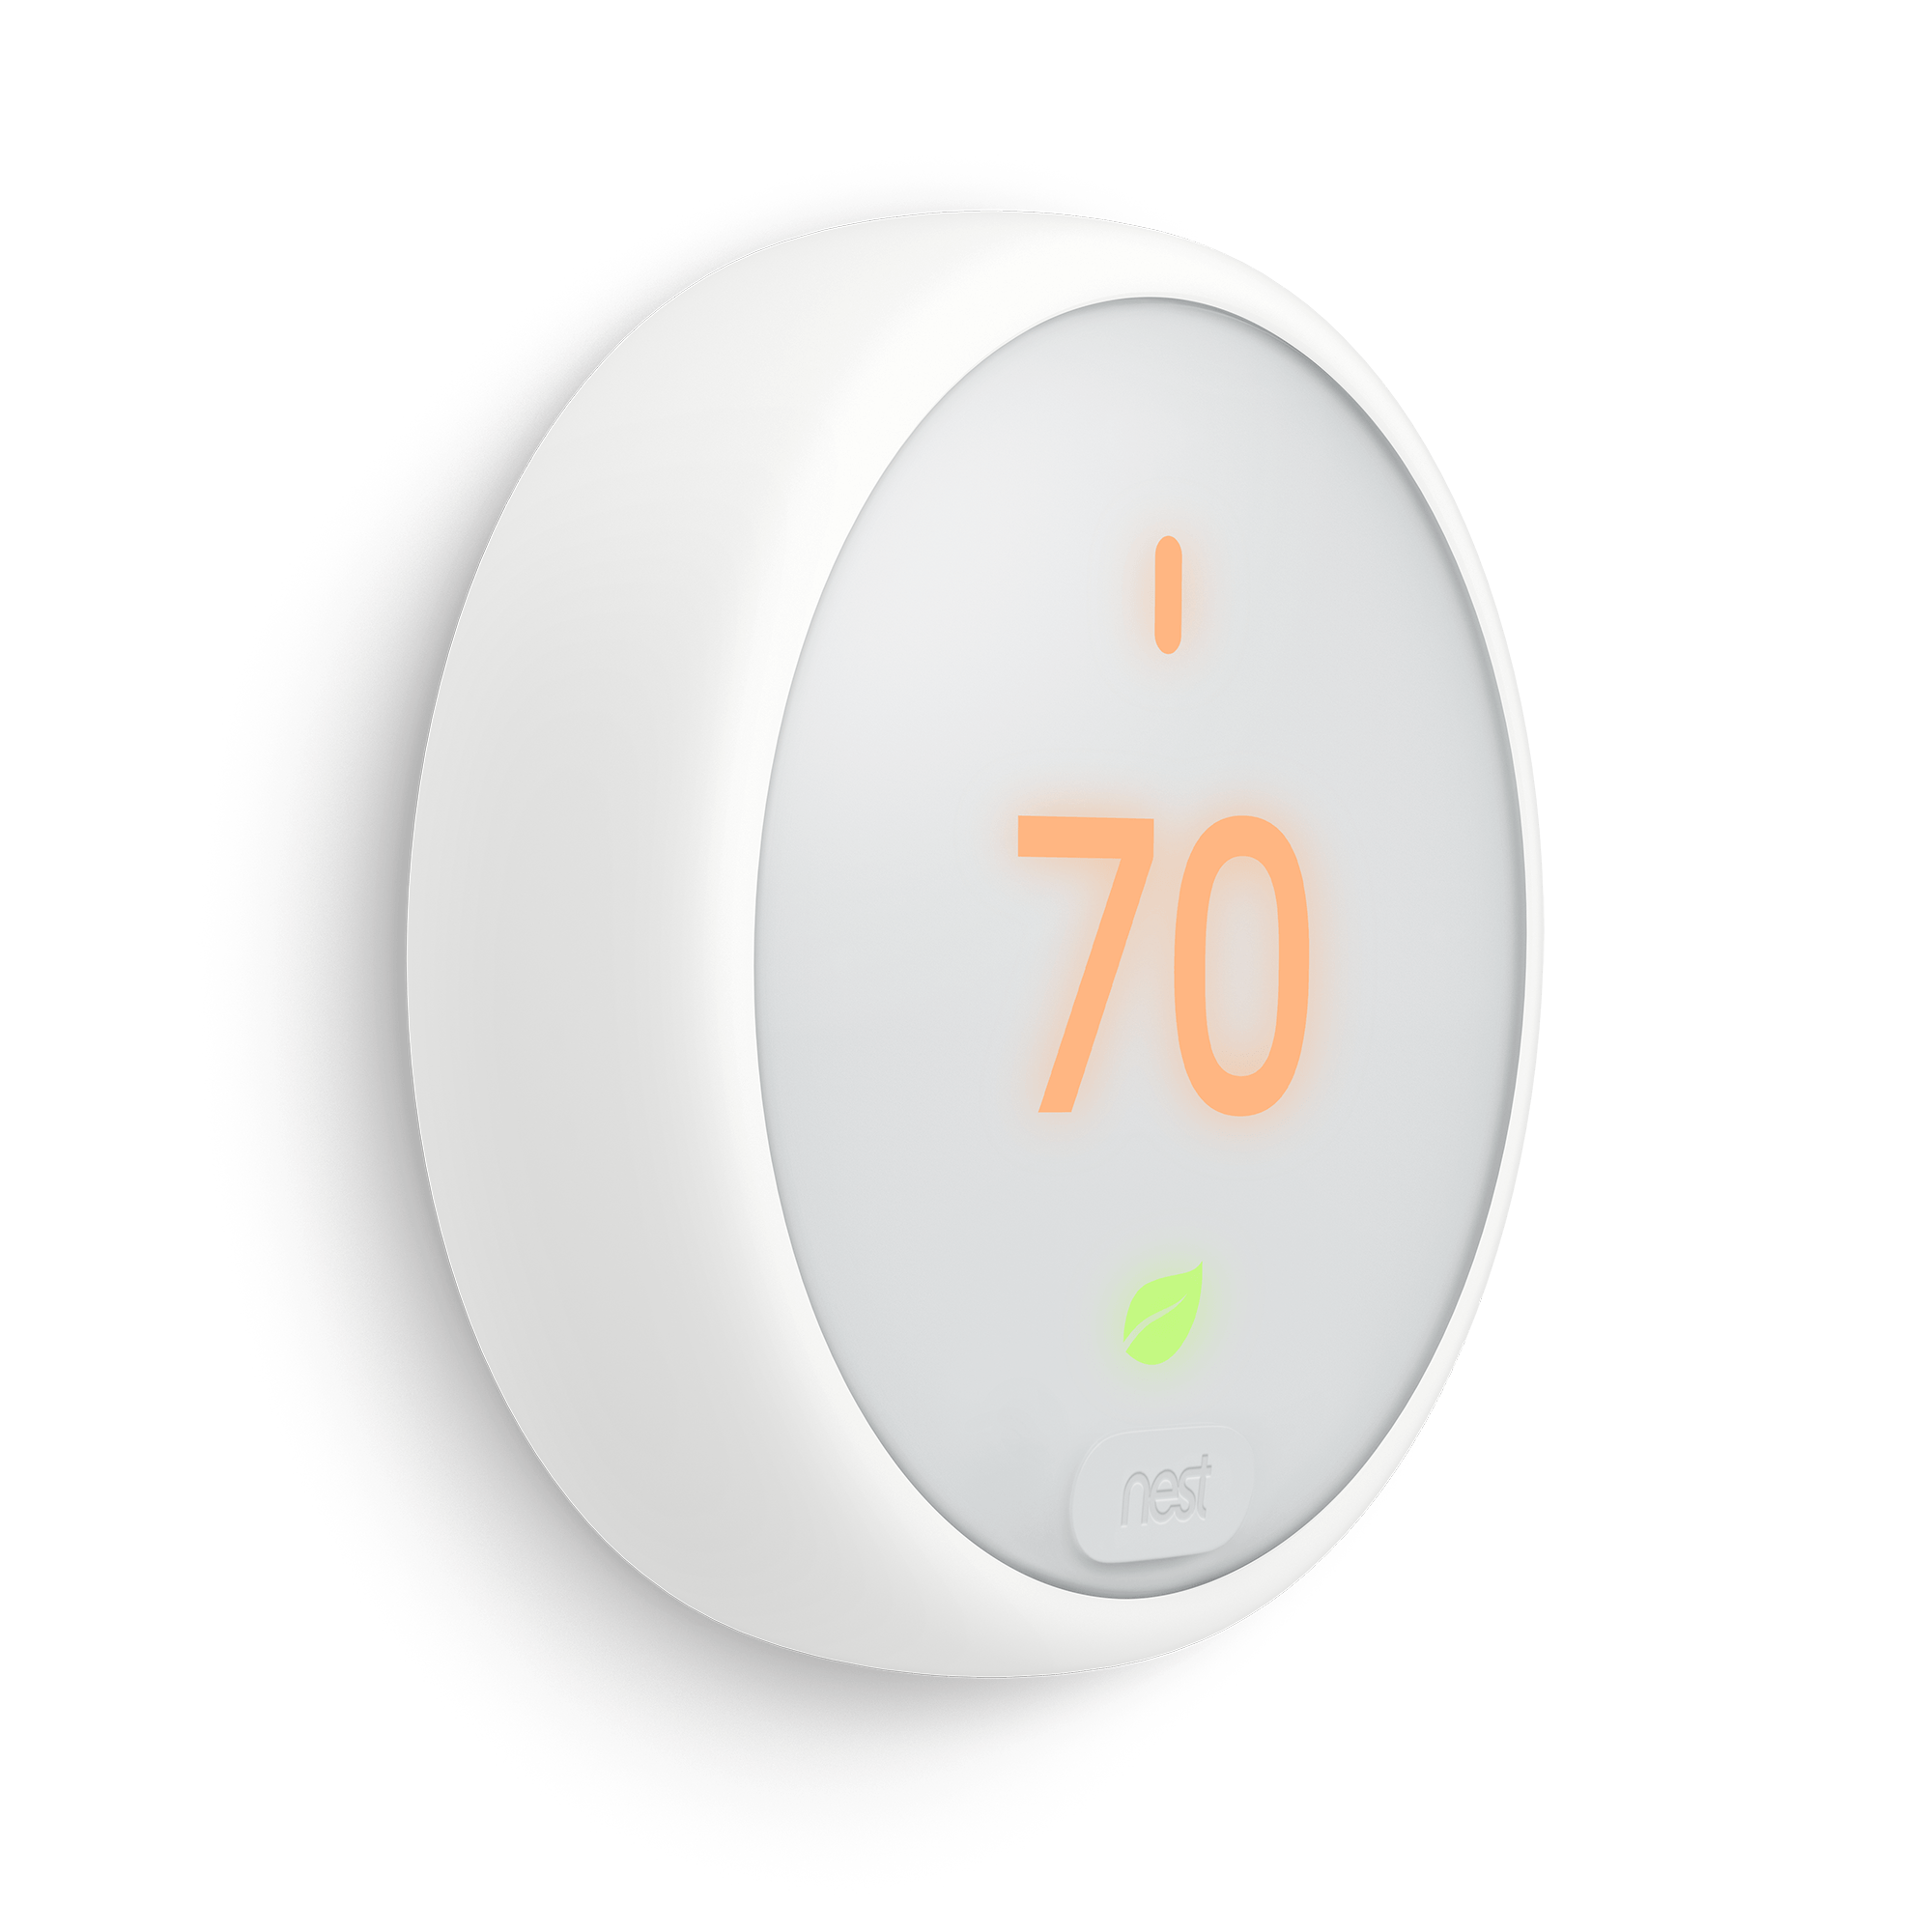 Google Nest Thermostat E in White - image 4 of 5